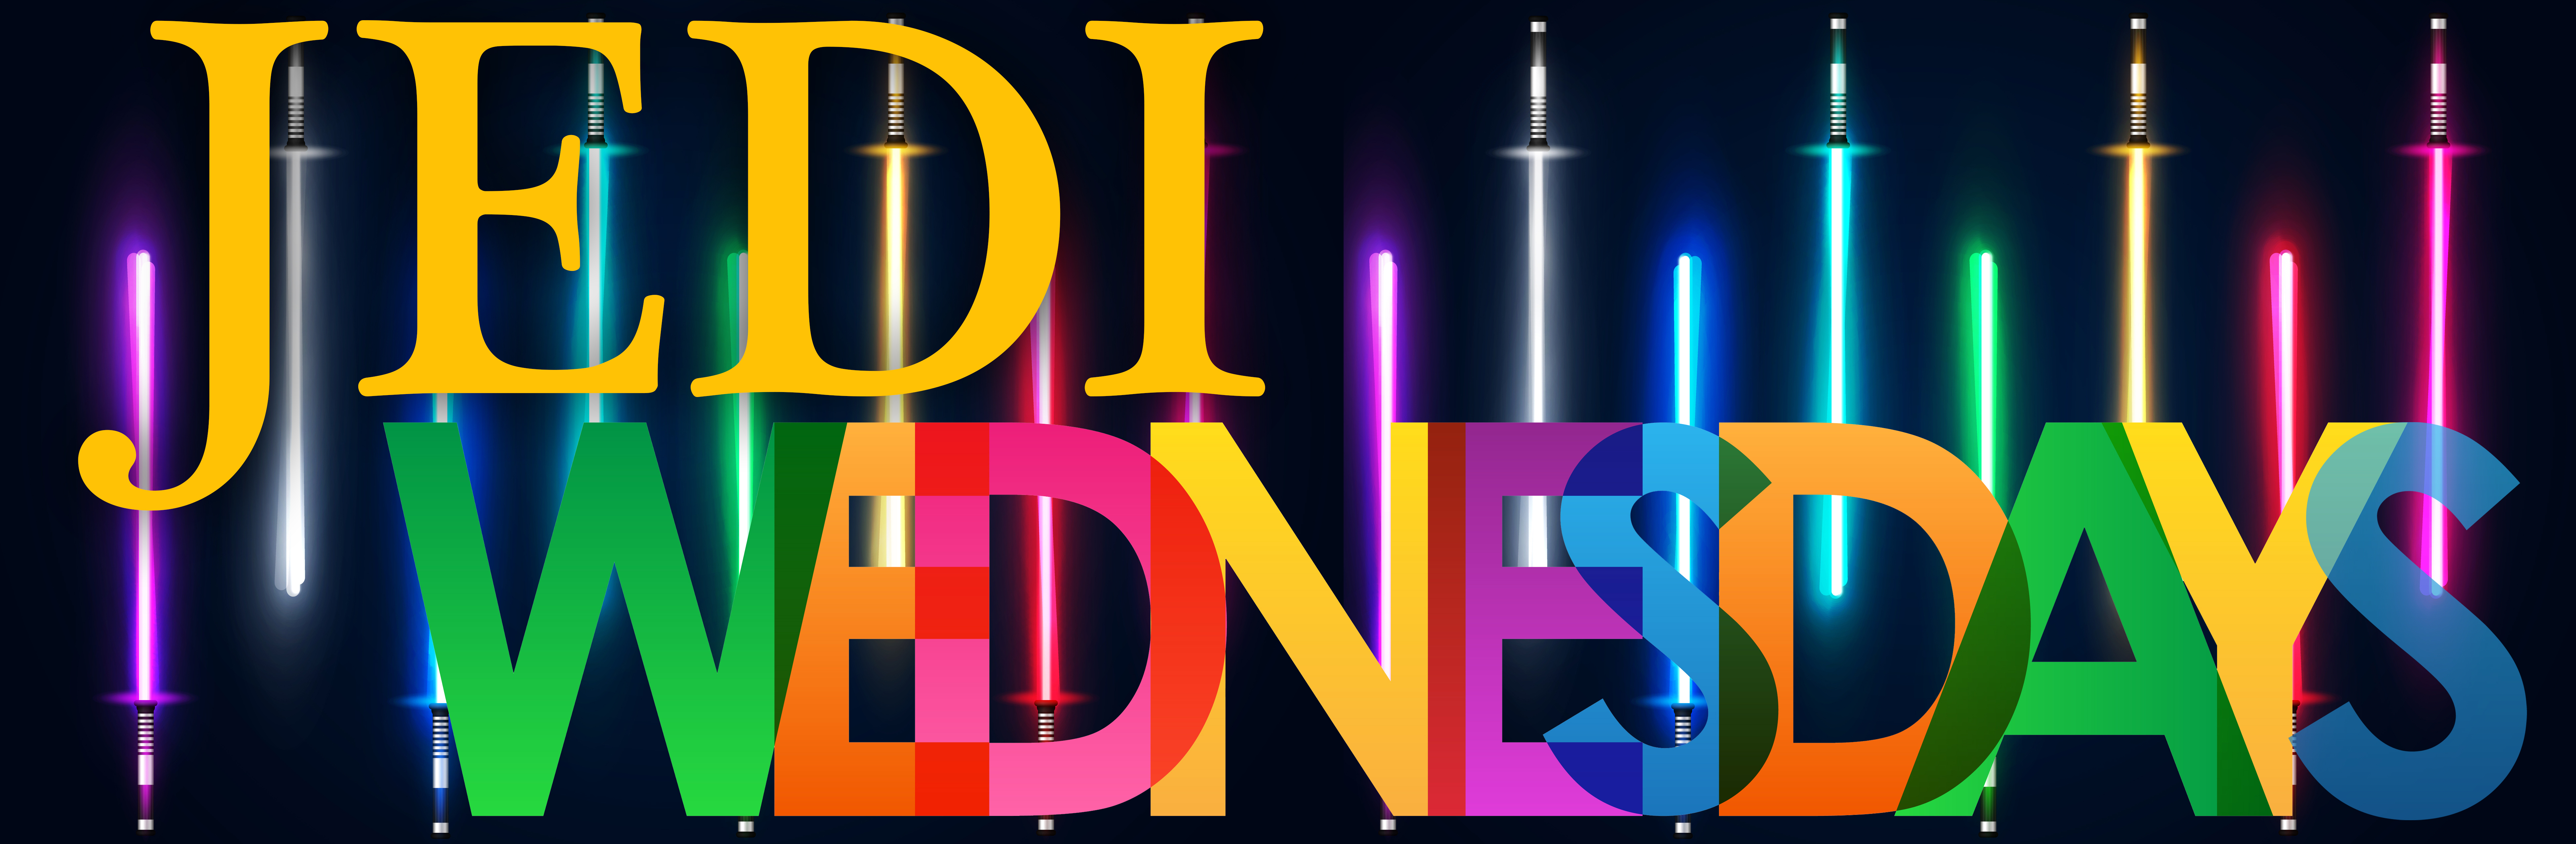 JEDI Wednesdays Banner with Lightsabers on the right